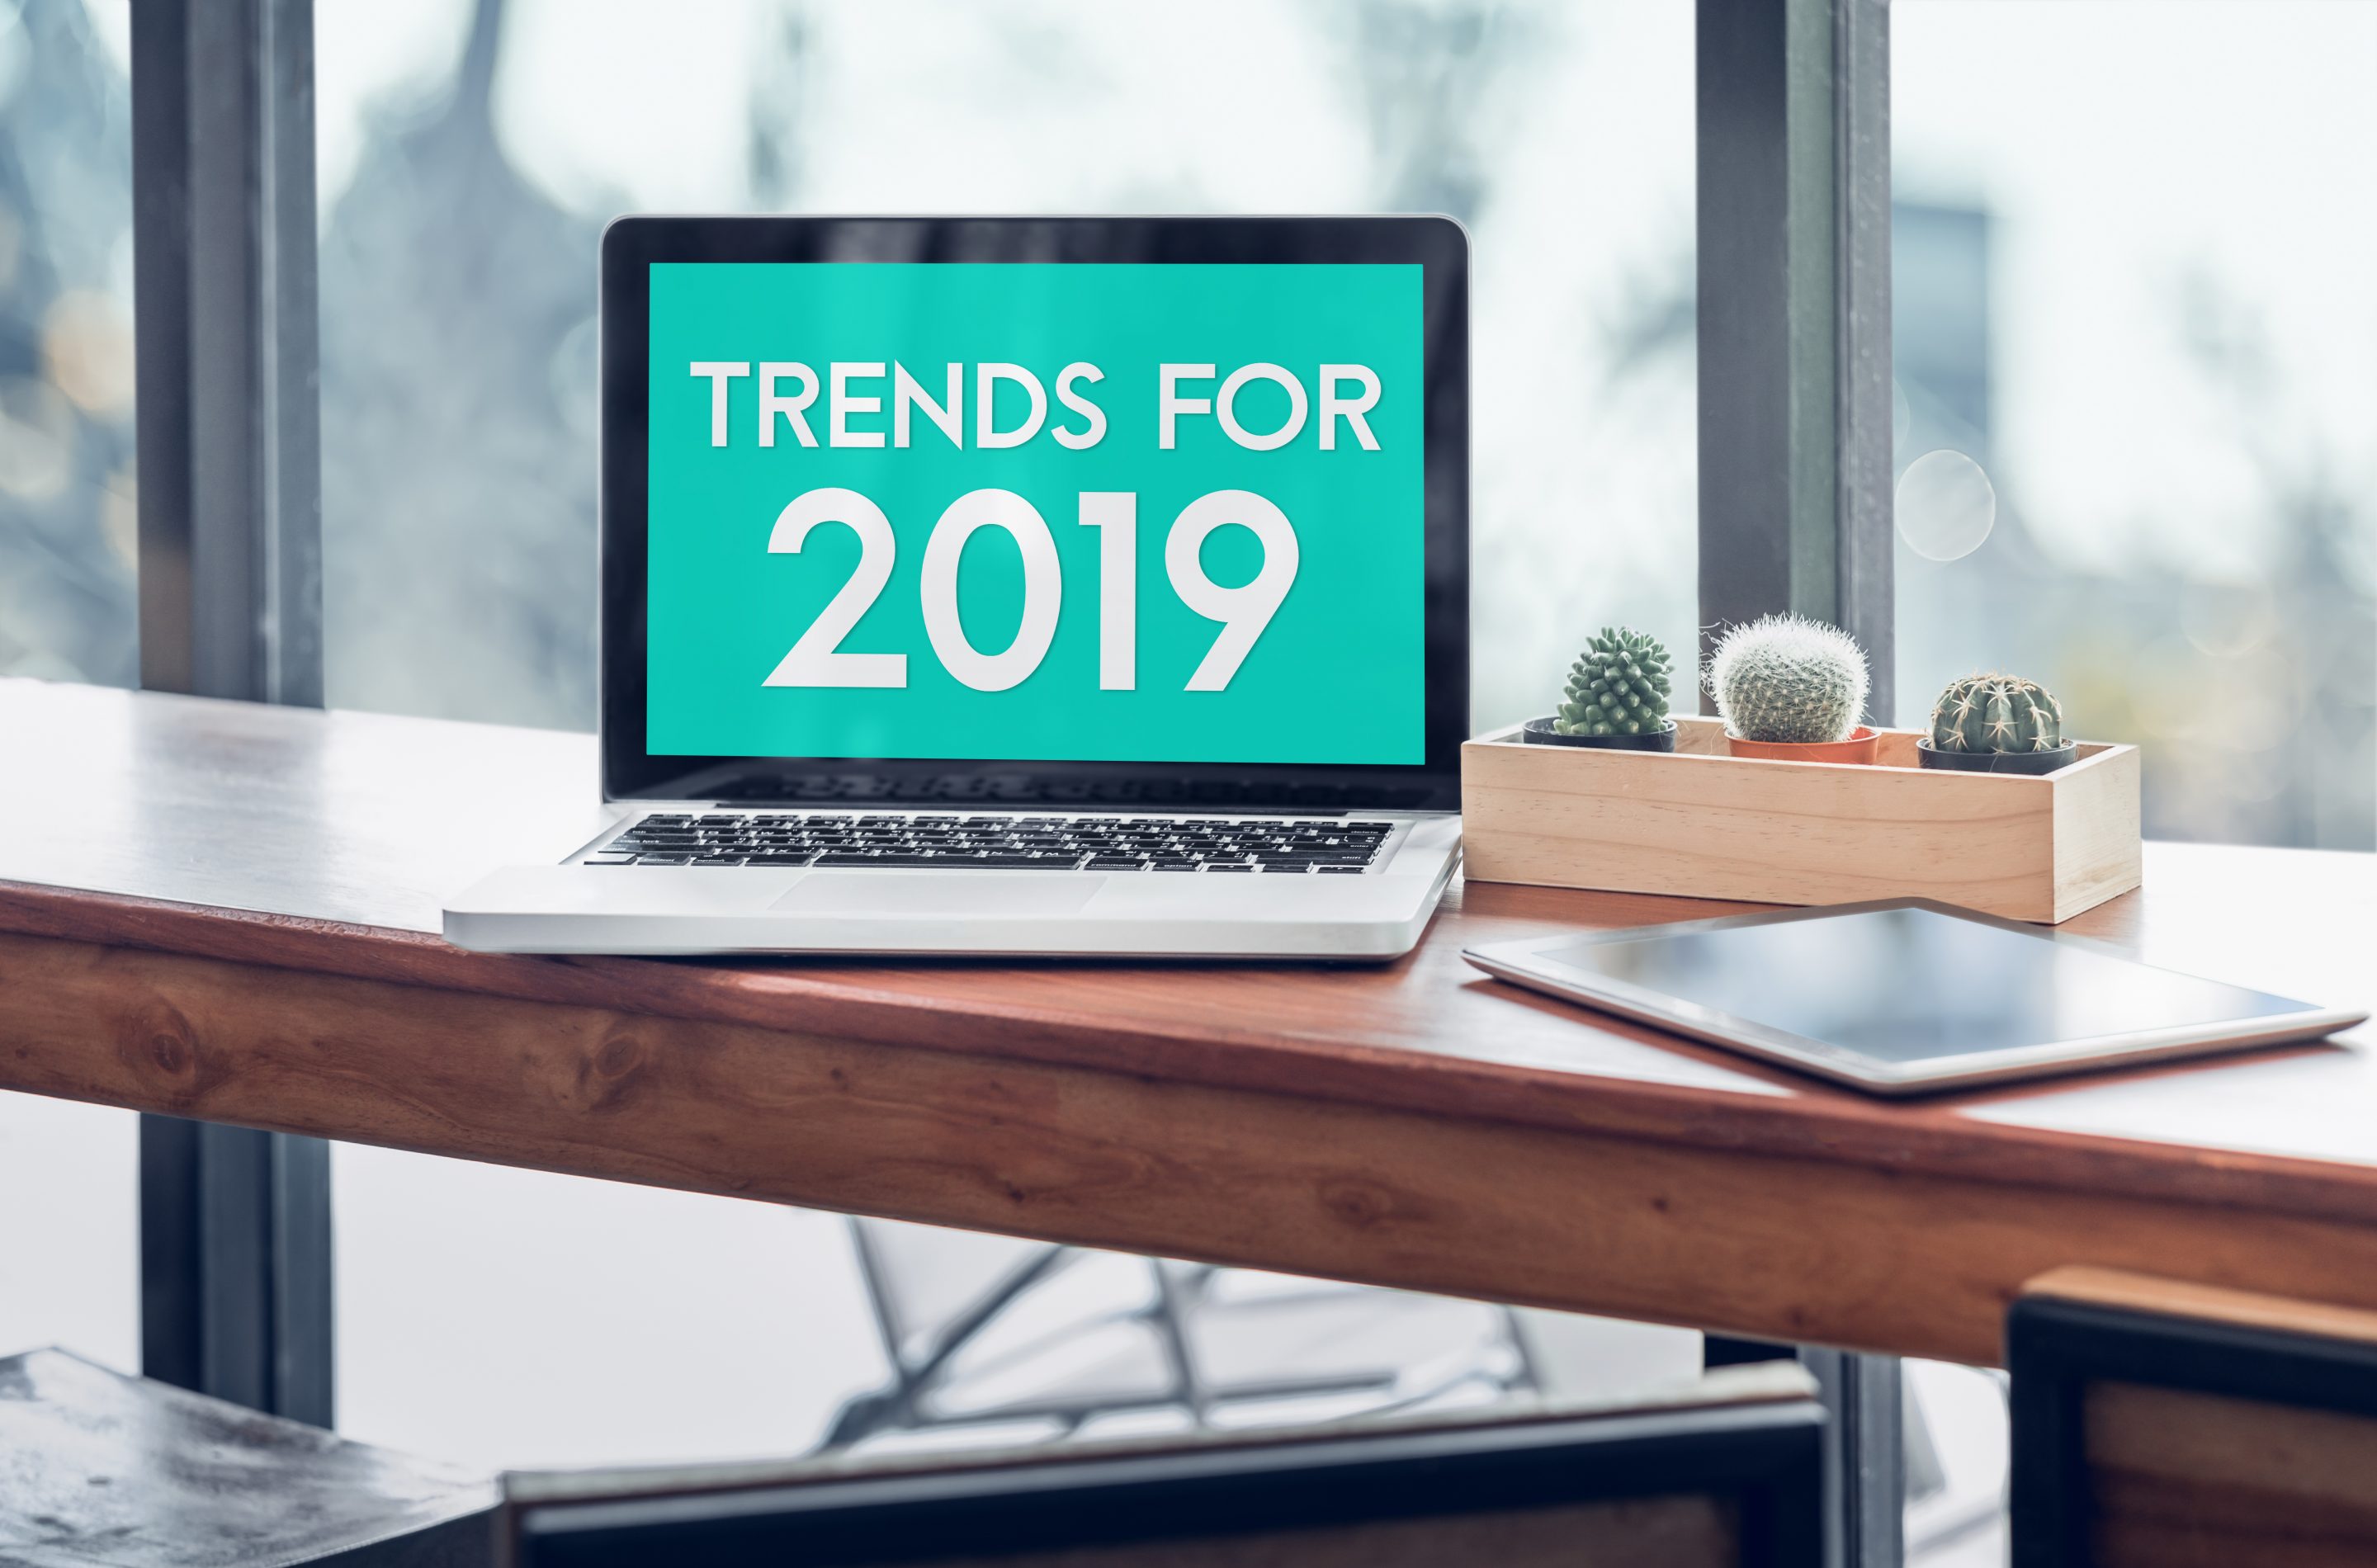 Trends for 2019 word in laptop computer screen with tablet on wood stood table in at window with blur background,Digital Business or marketing trending